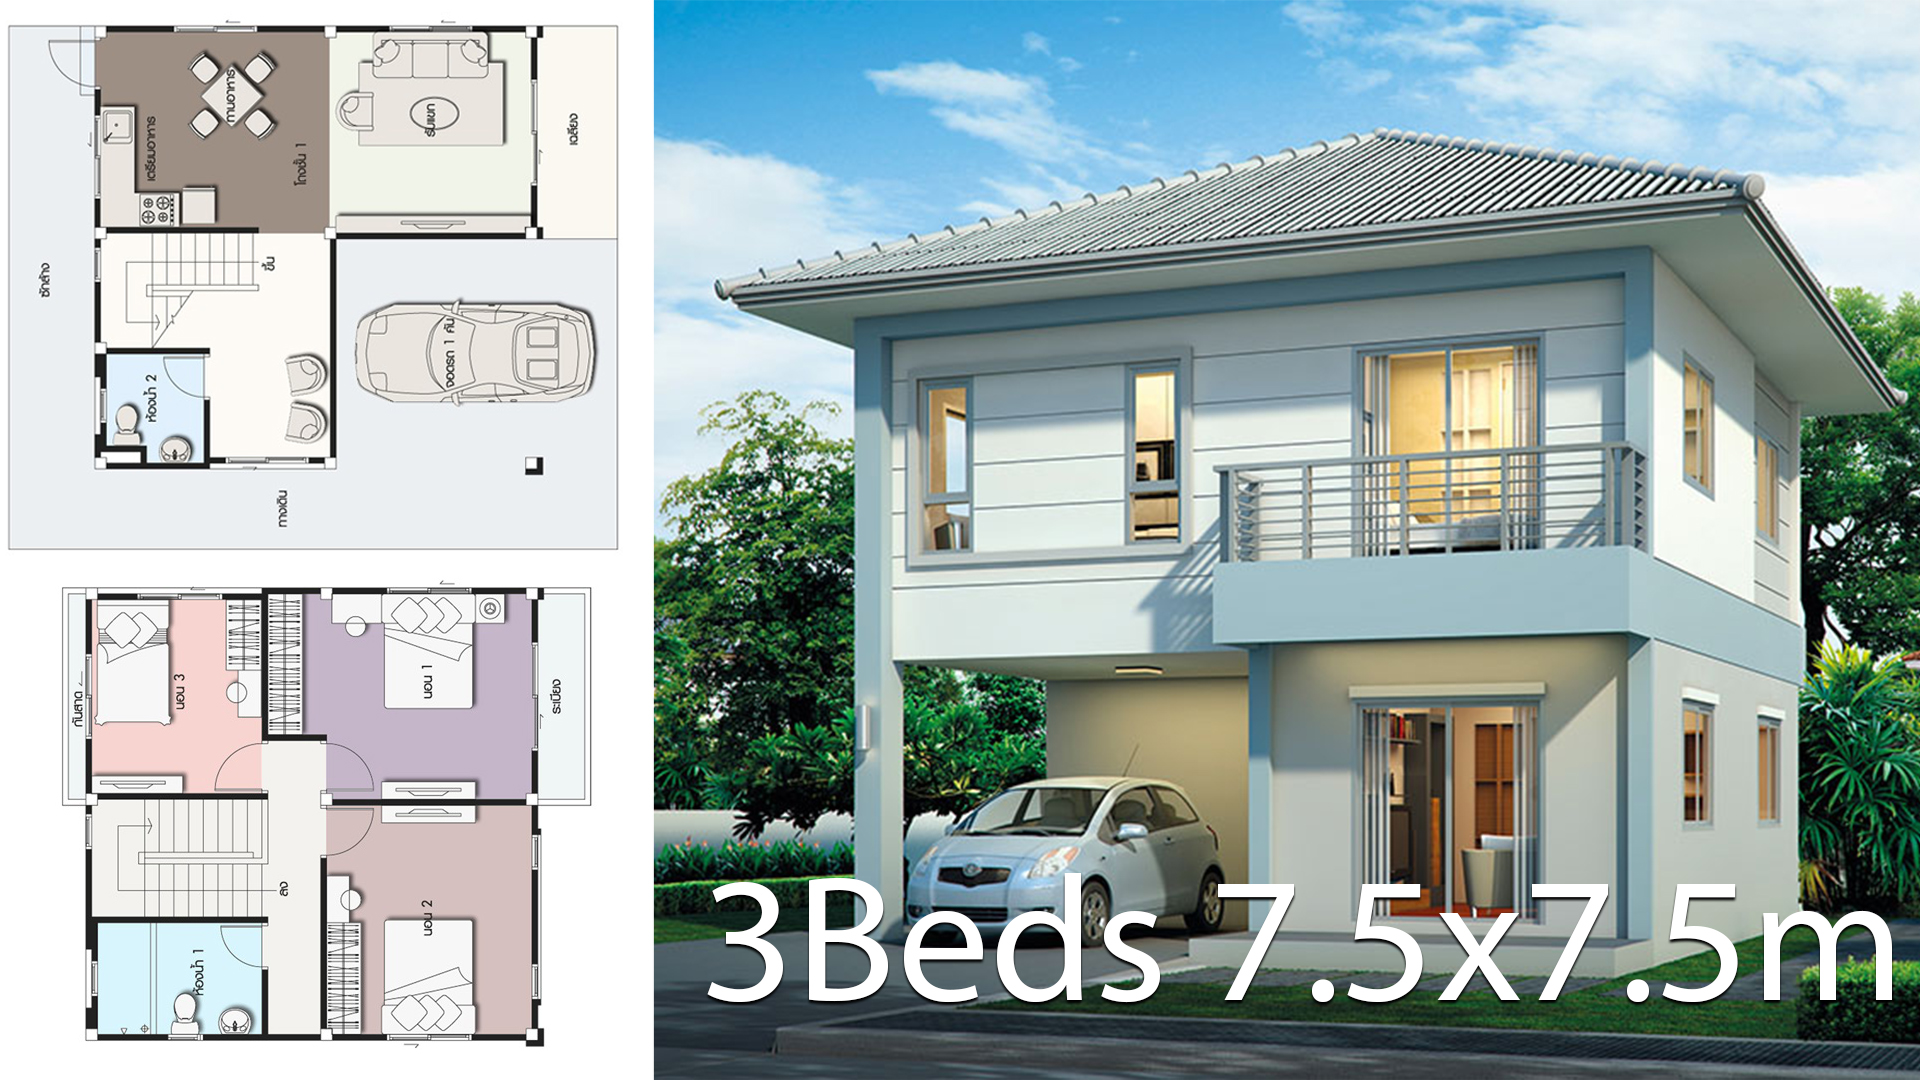 Small Modern House 7.7x7.5m with 3 Bedrooms floor plan